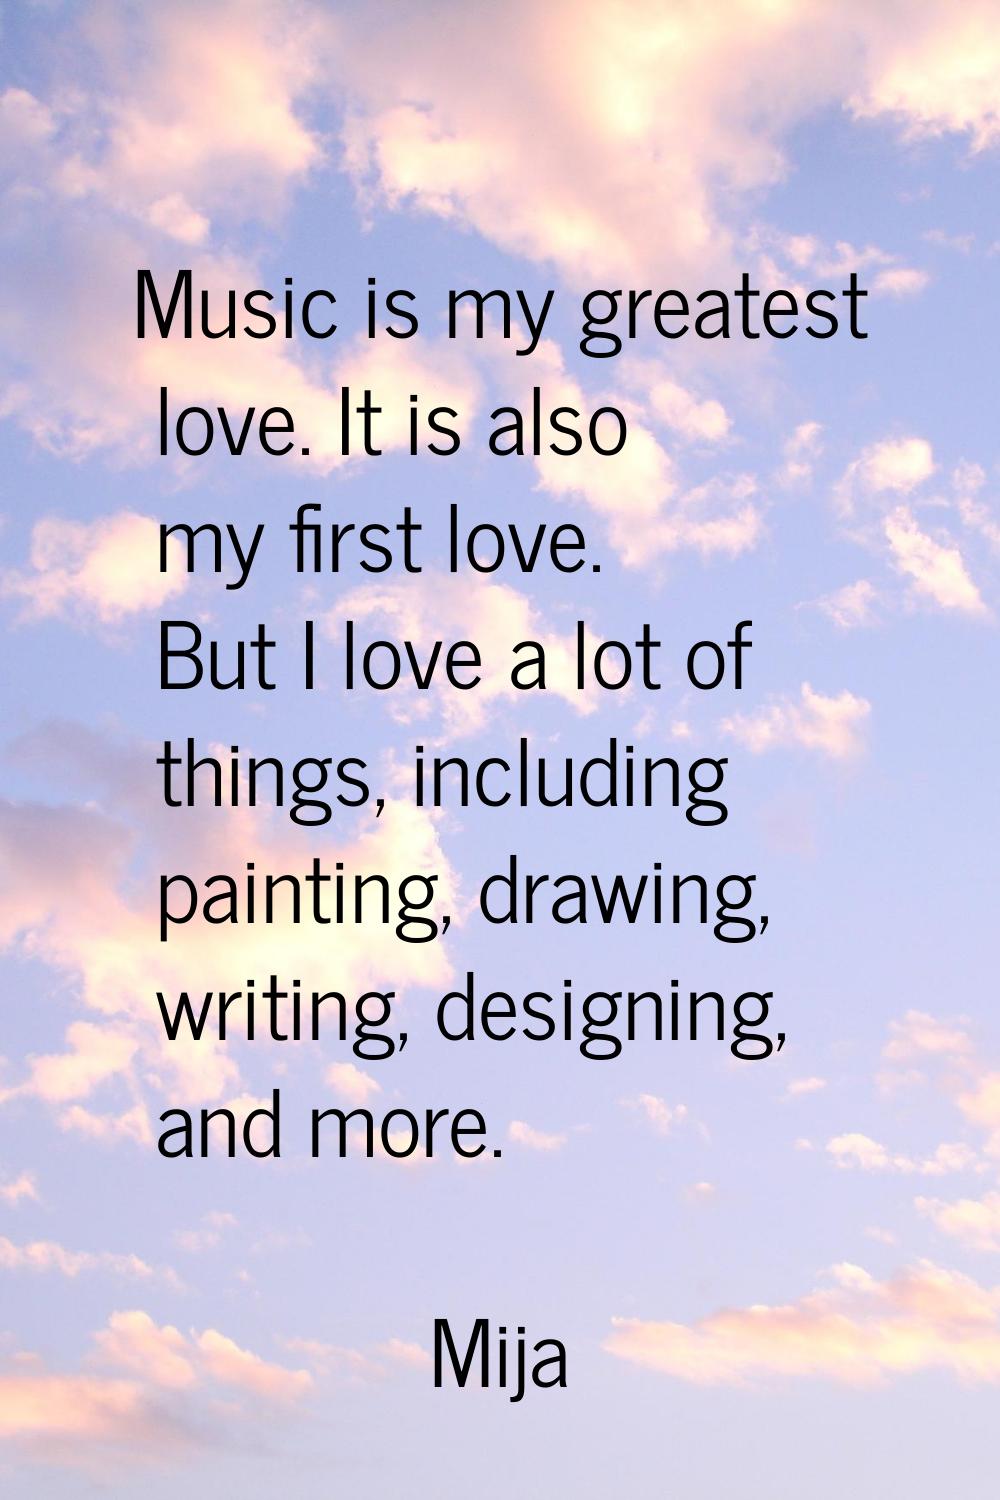 Music is my greatest love. It is also my first love. But I love a lot of things, including painting